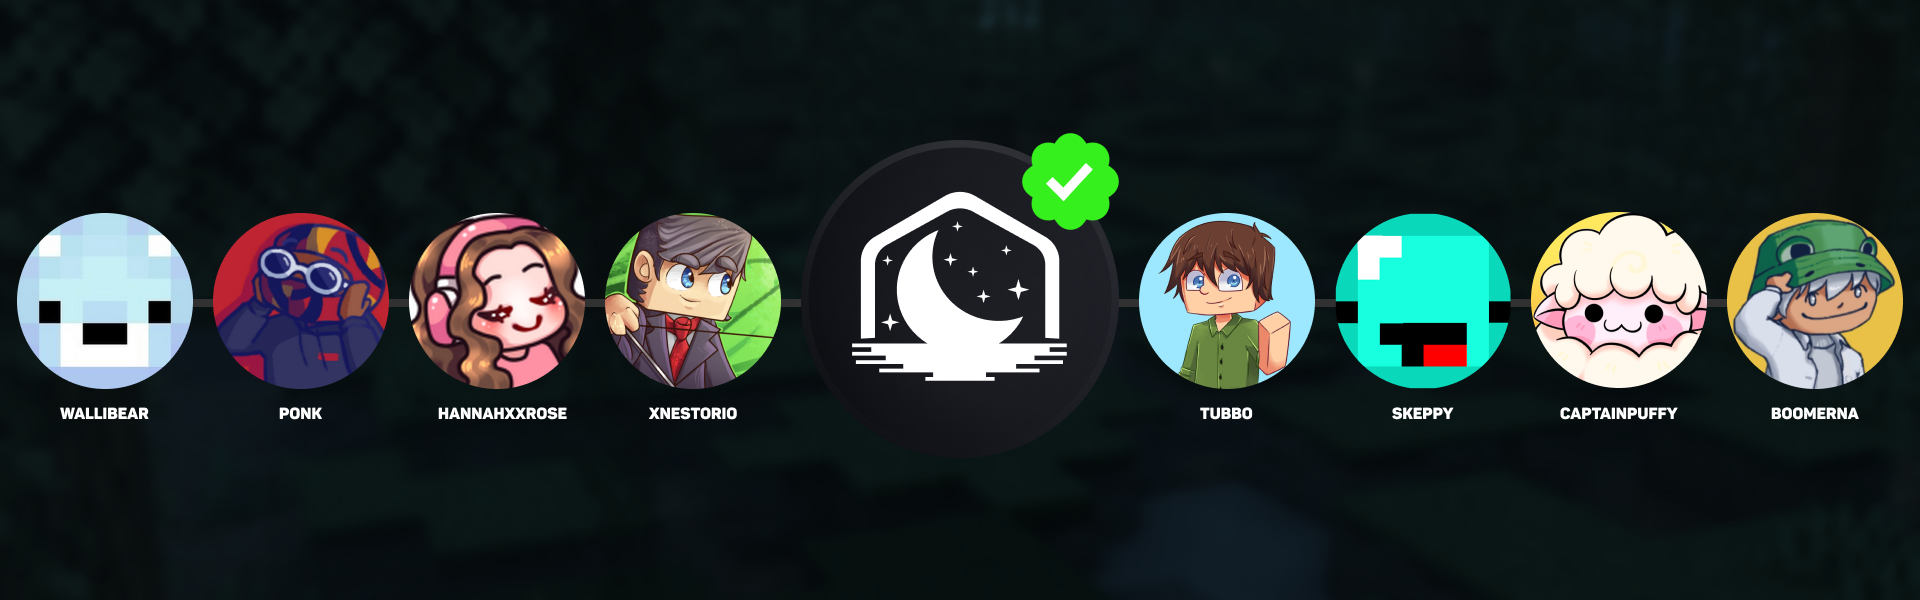 Lunar Client is trusted by the biggest names in Minecraft